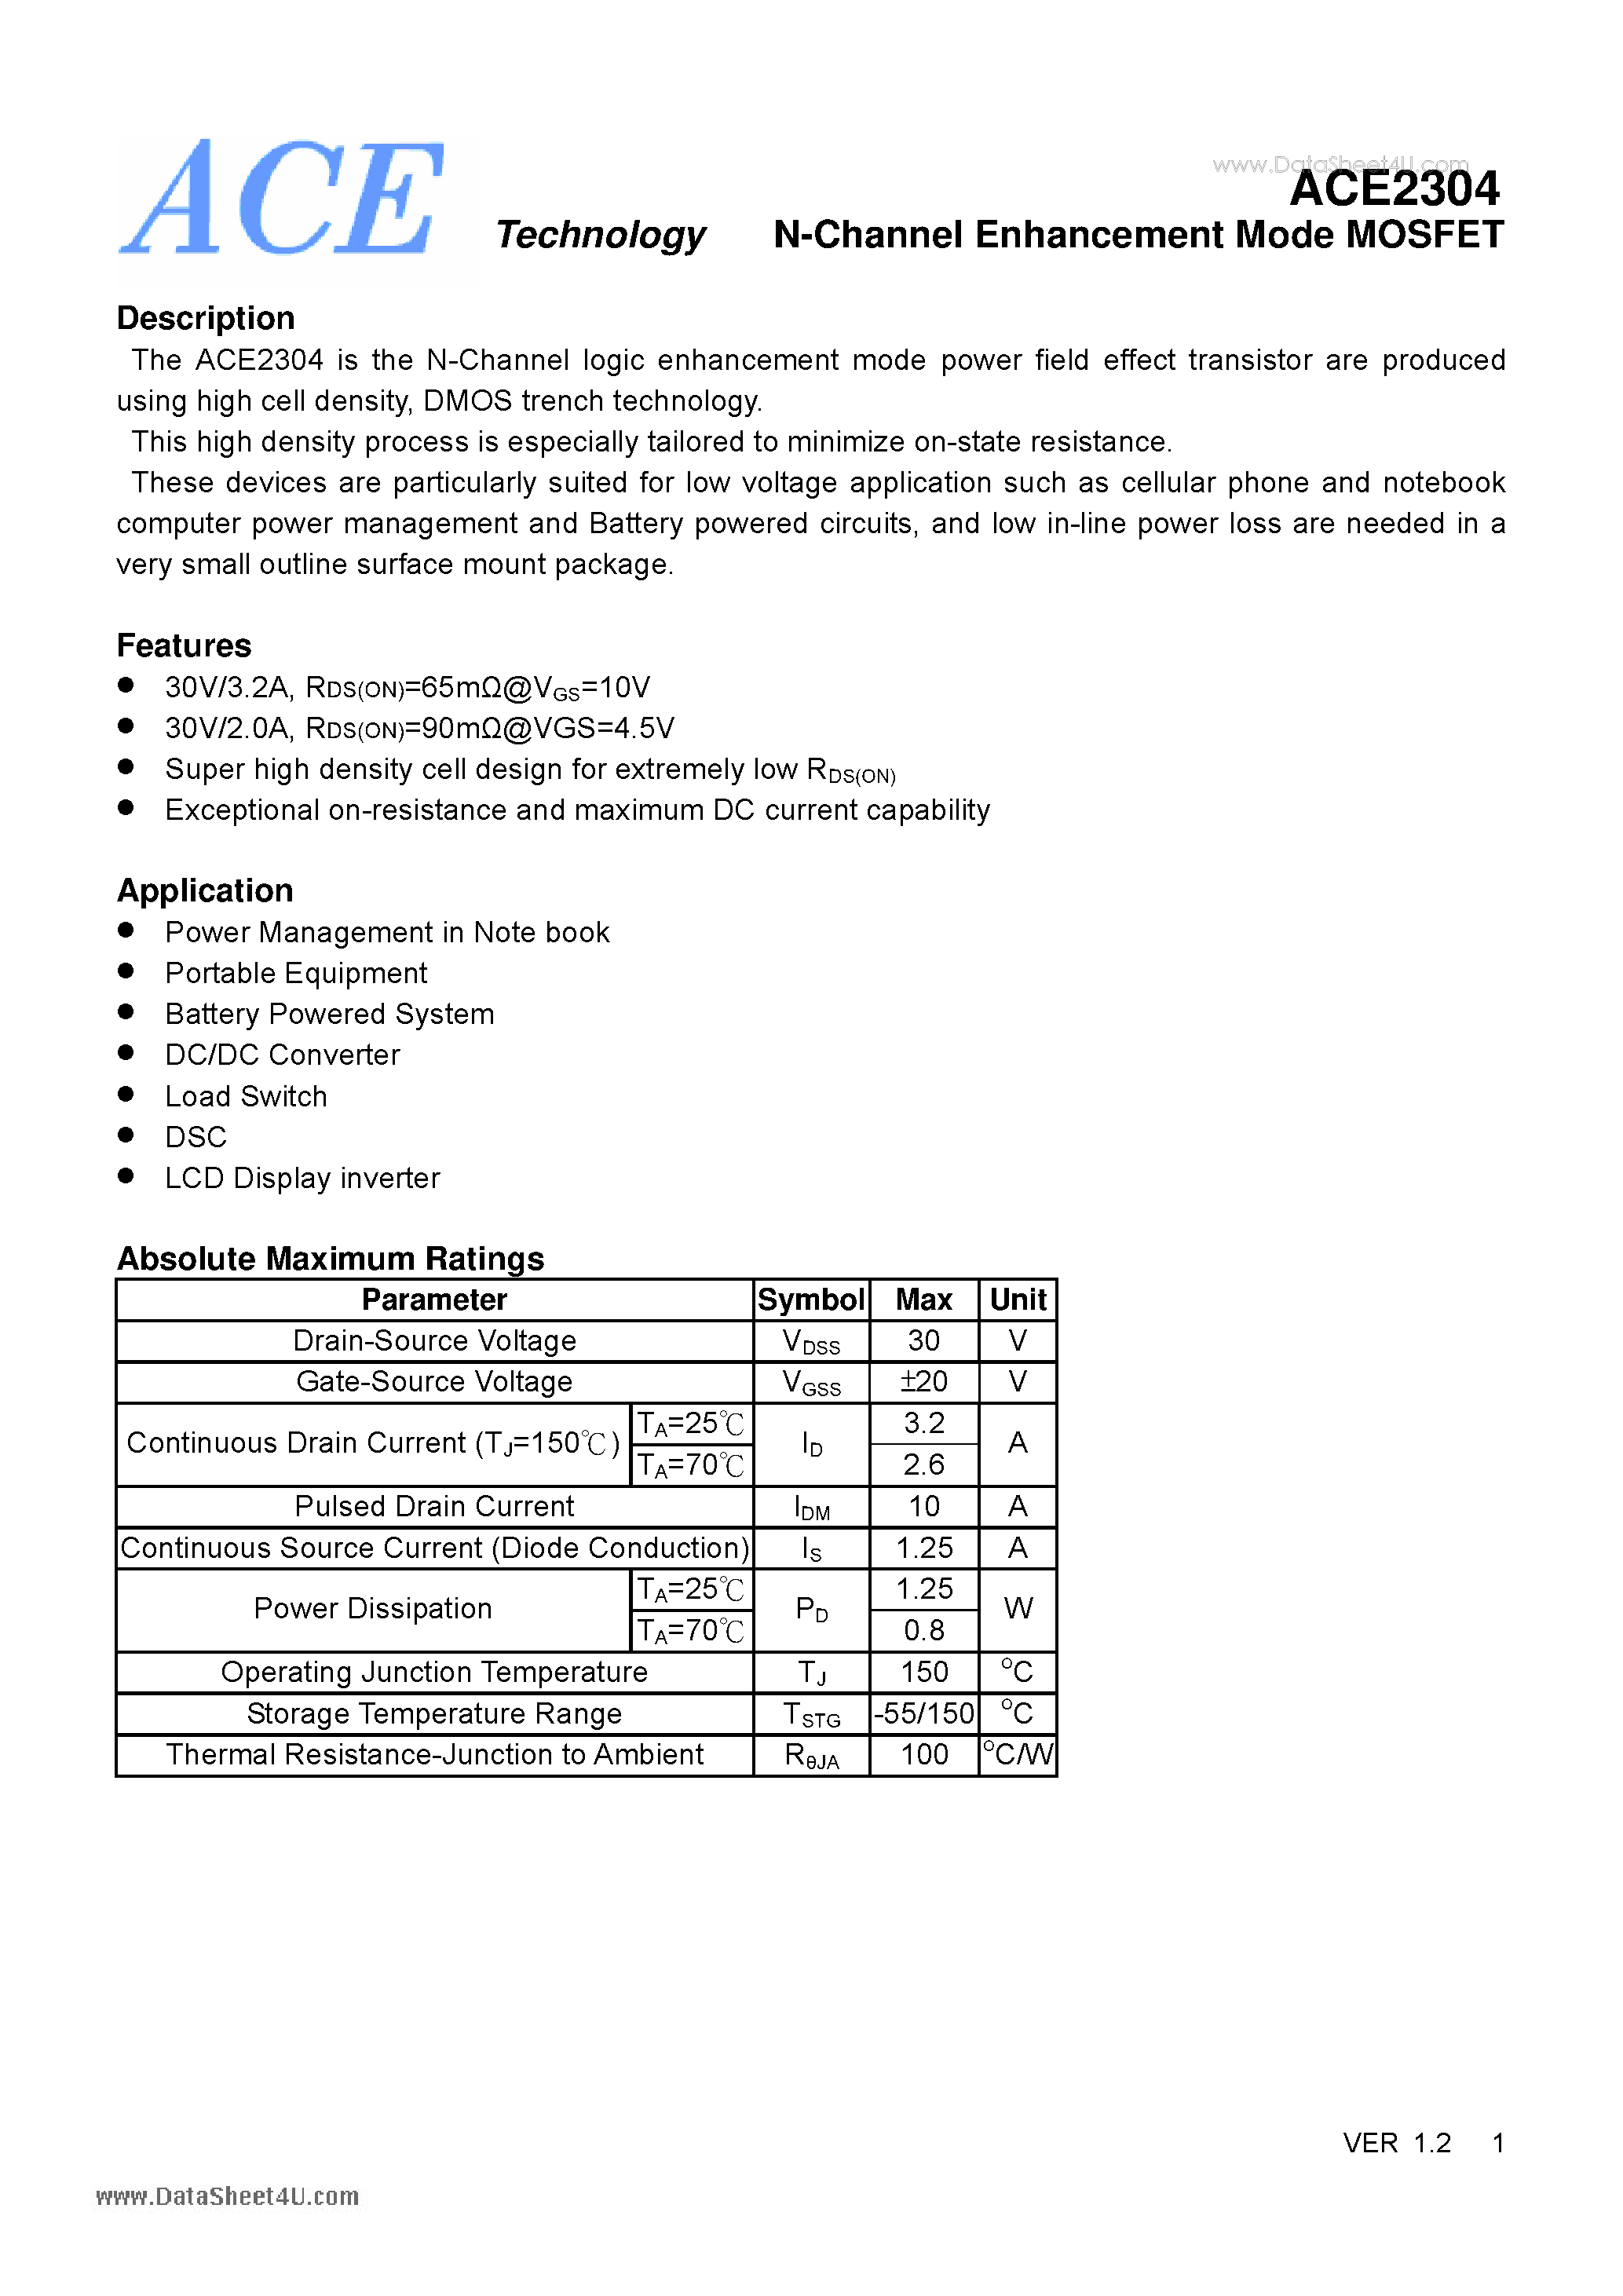 Datasheet ACE2304 - N-Channel Enhancement Mode MOSFET page 1